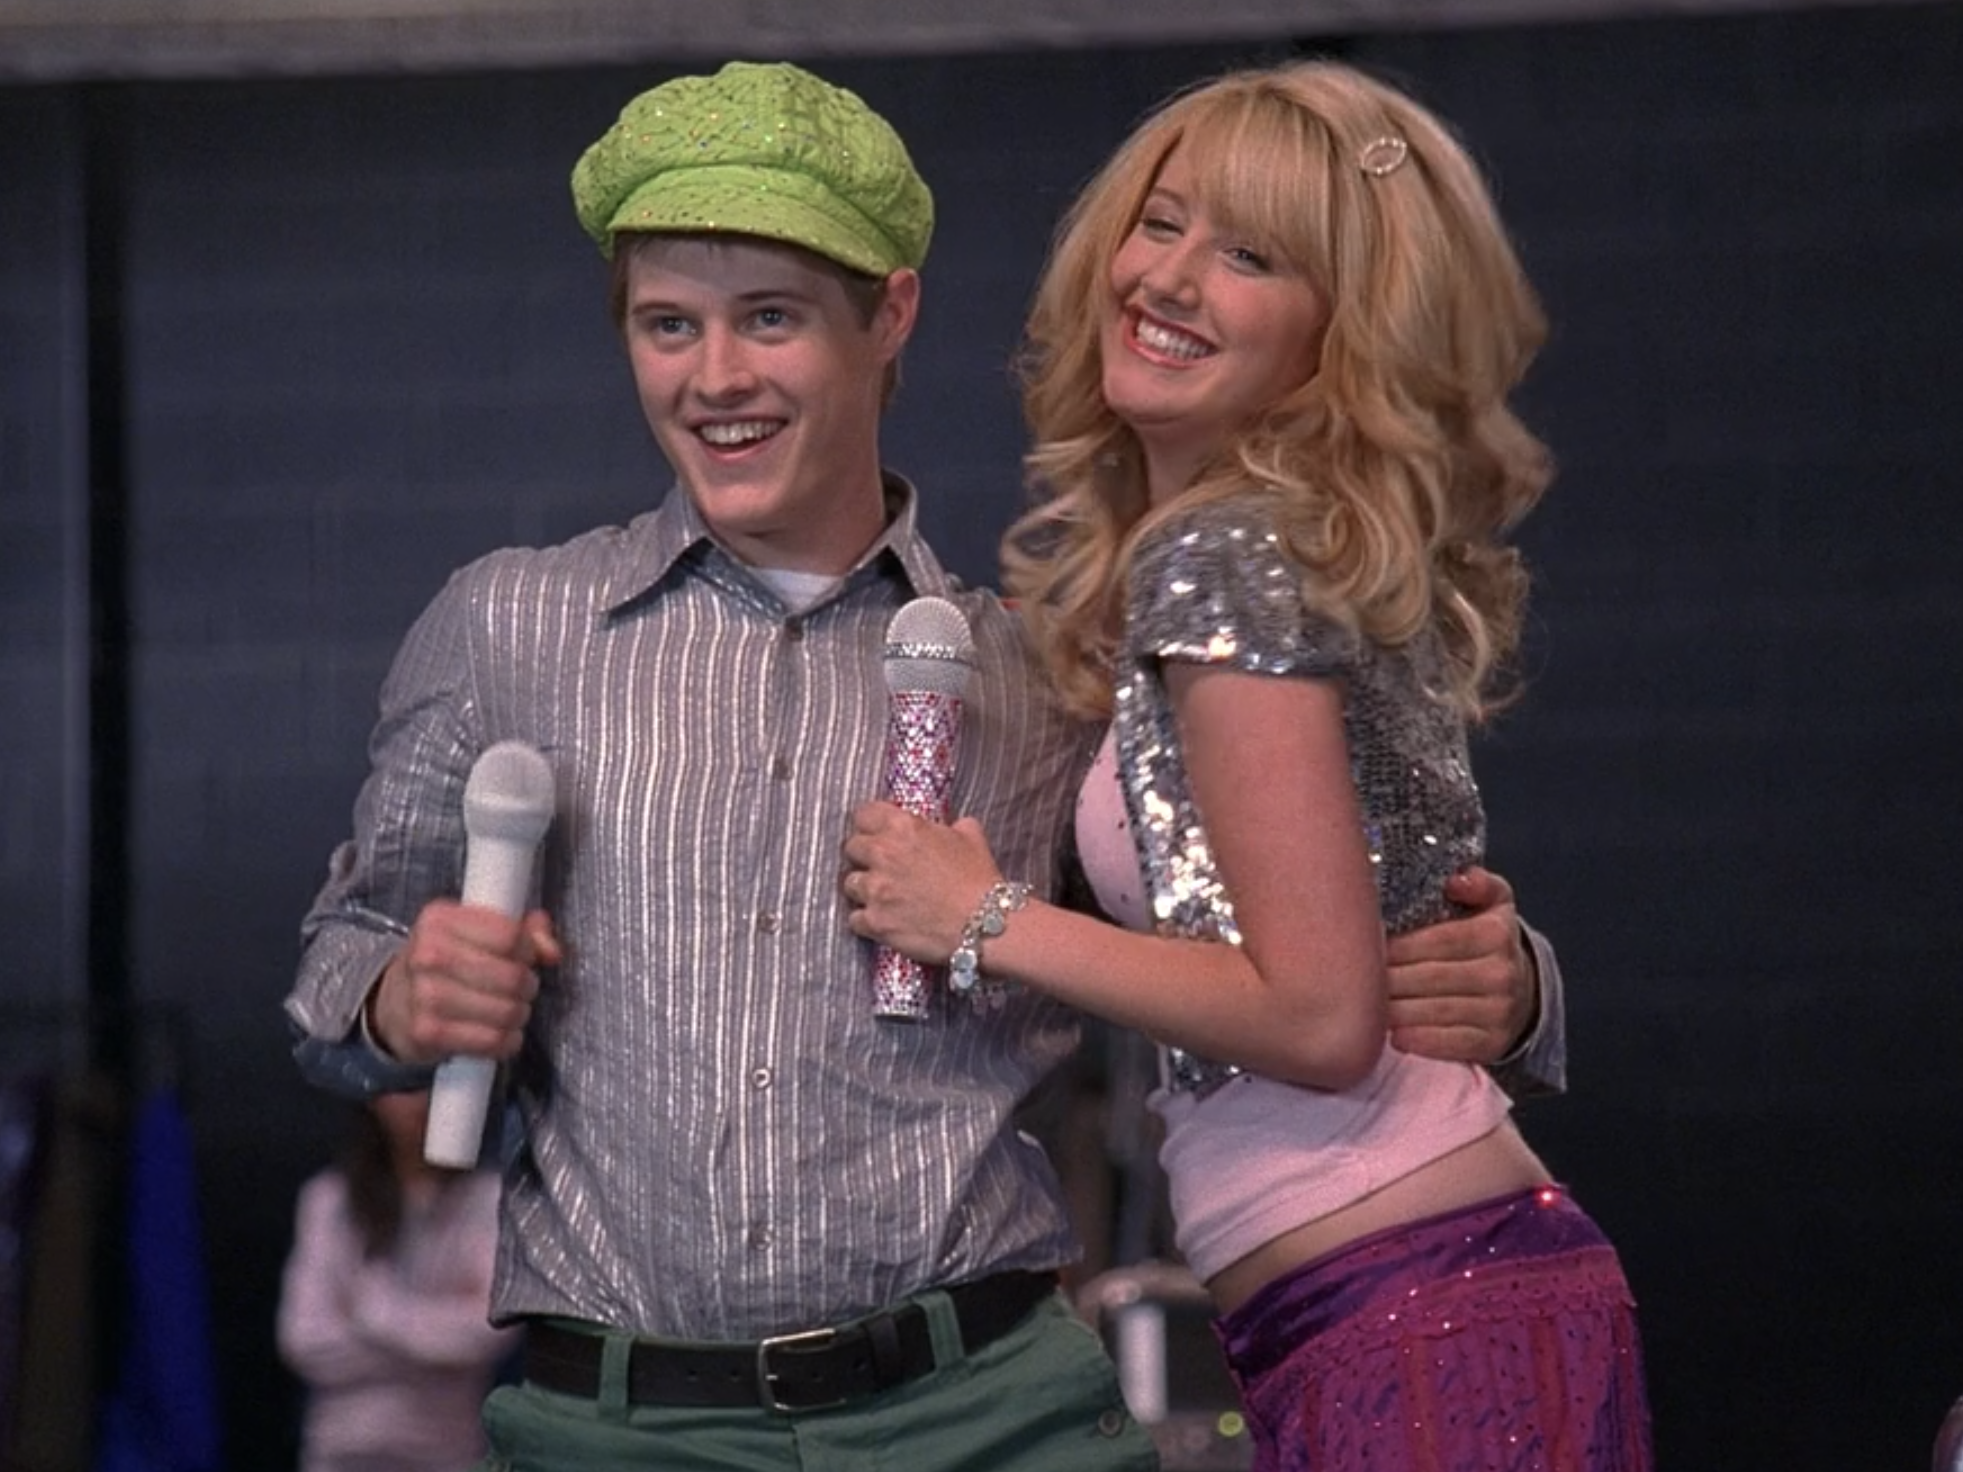 Ryan Evans and Ashley Tisdale as Sharpay Evans in "High School Musical." 8 Credit Disney Channel